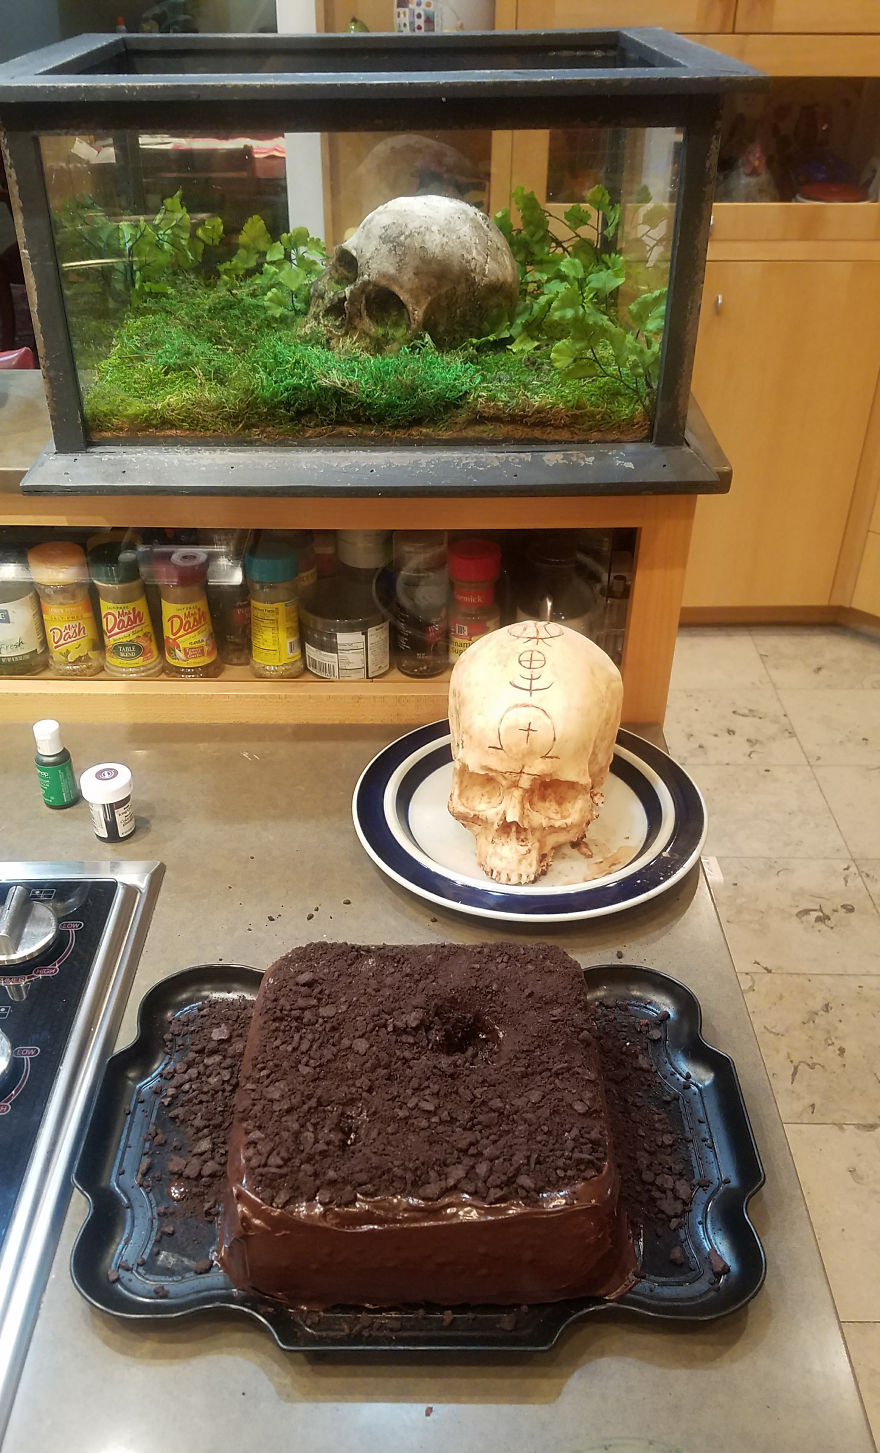 I Made A Skull Cake And Brought It To Work To Scare My Coworkers